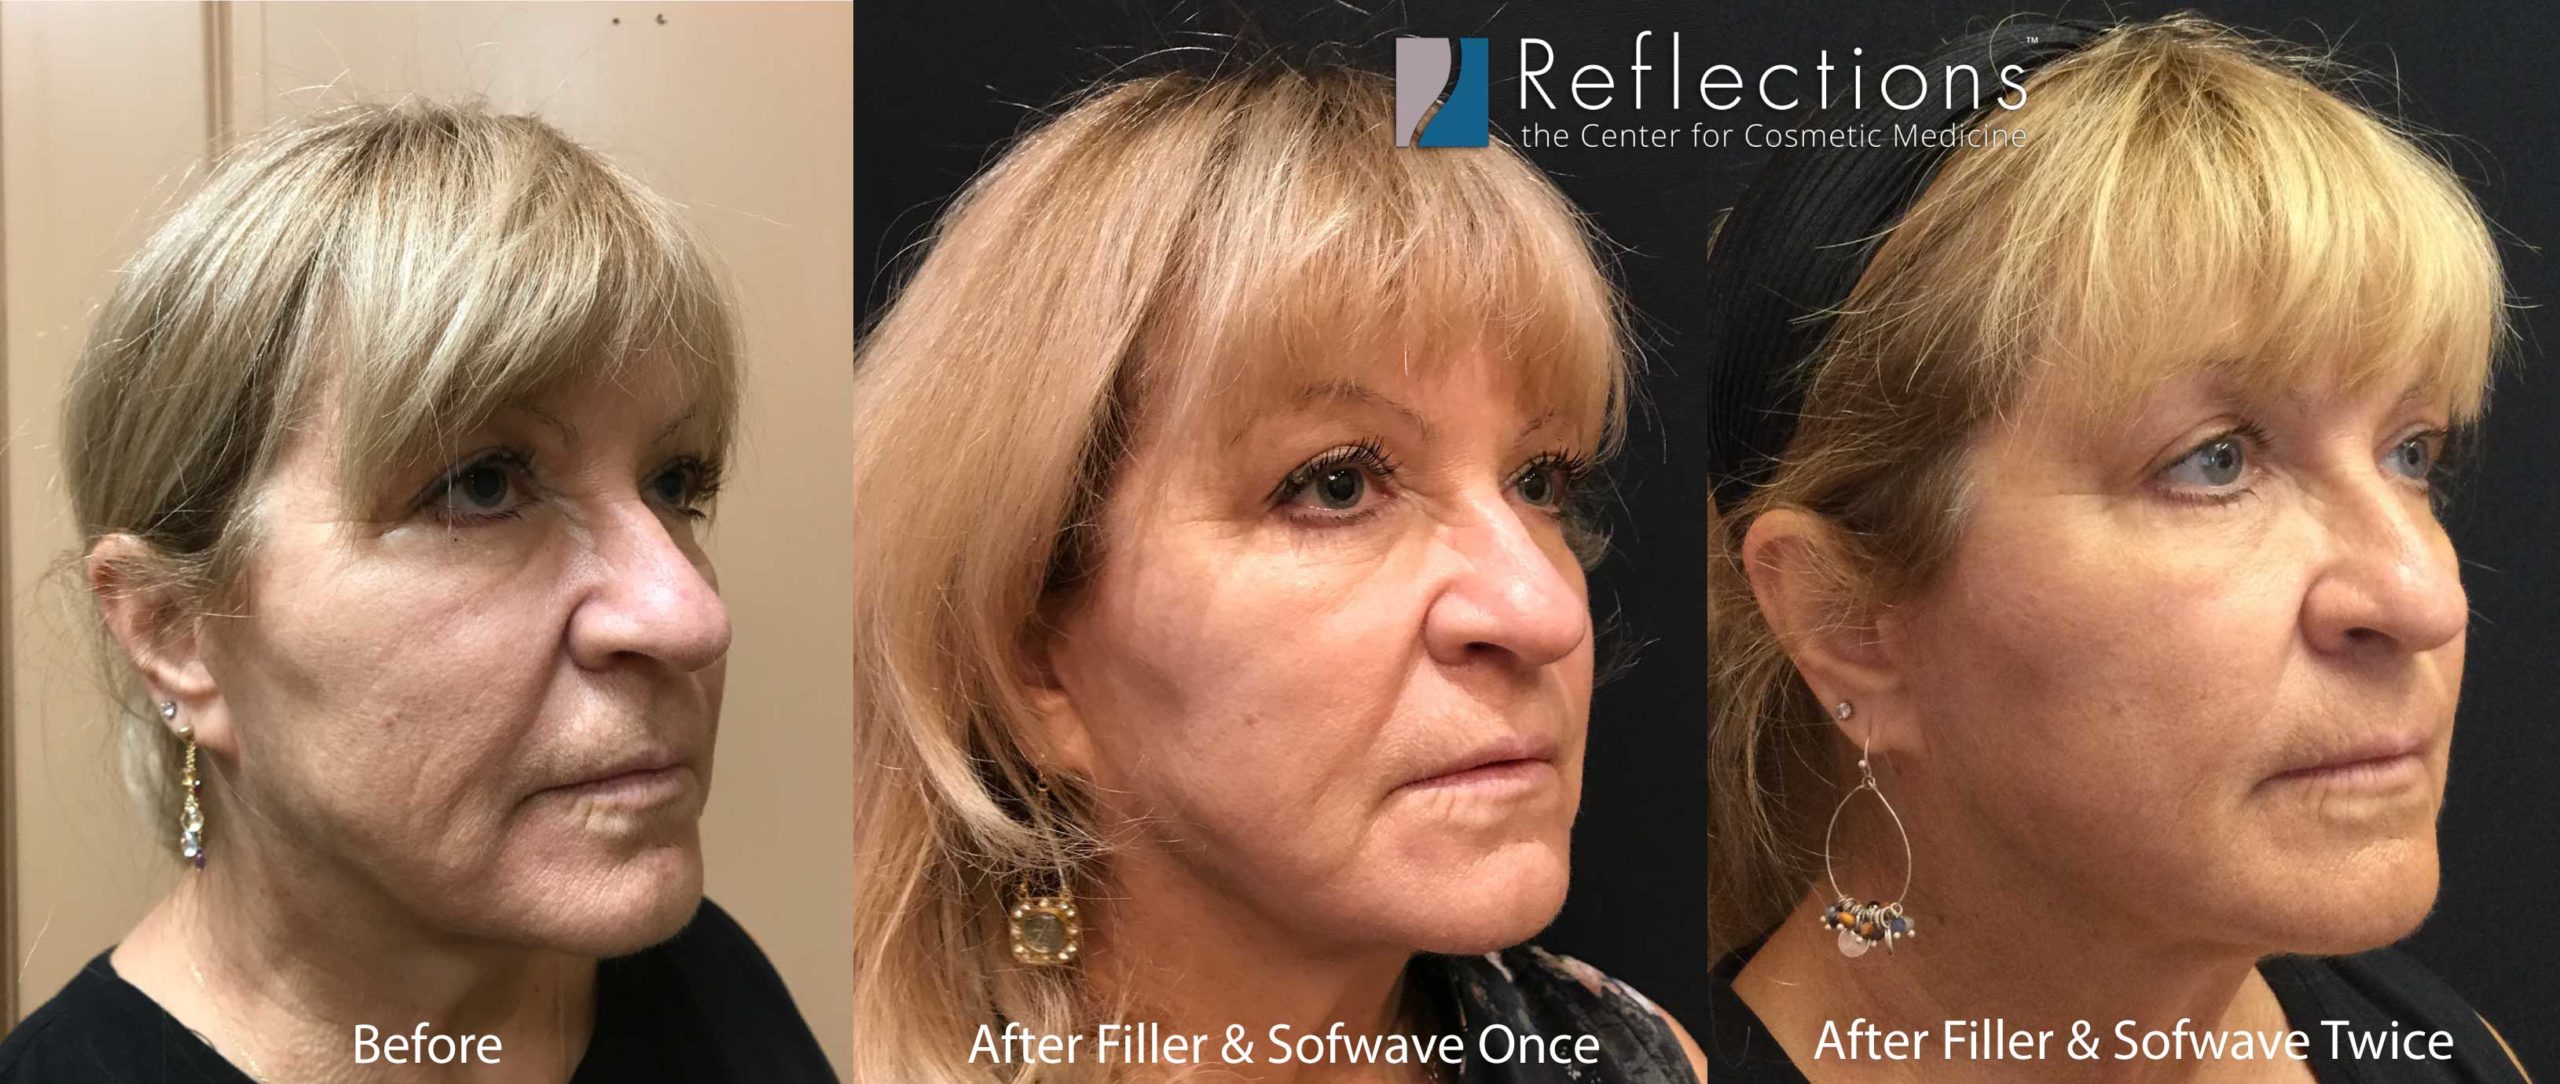 best-restylane-specials-near-me-nj-under-eye-fillers-price-cost